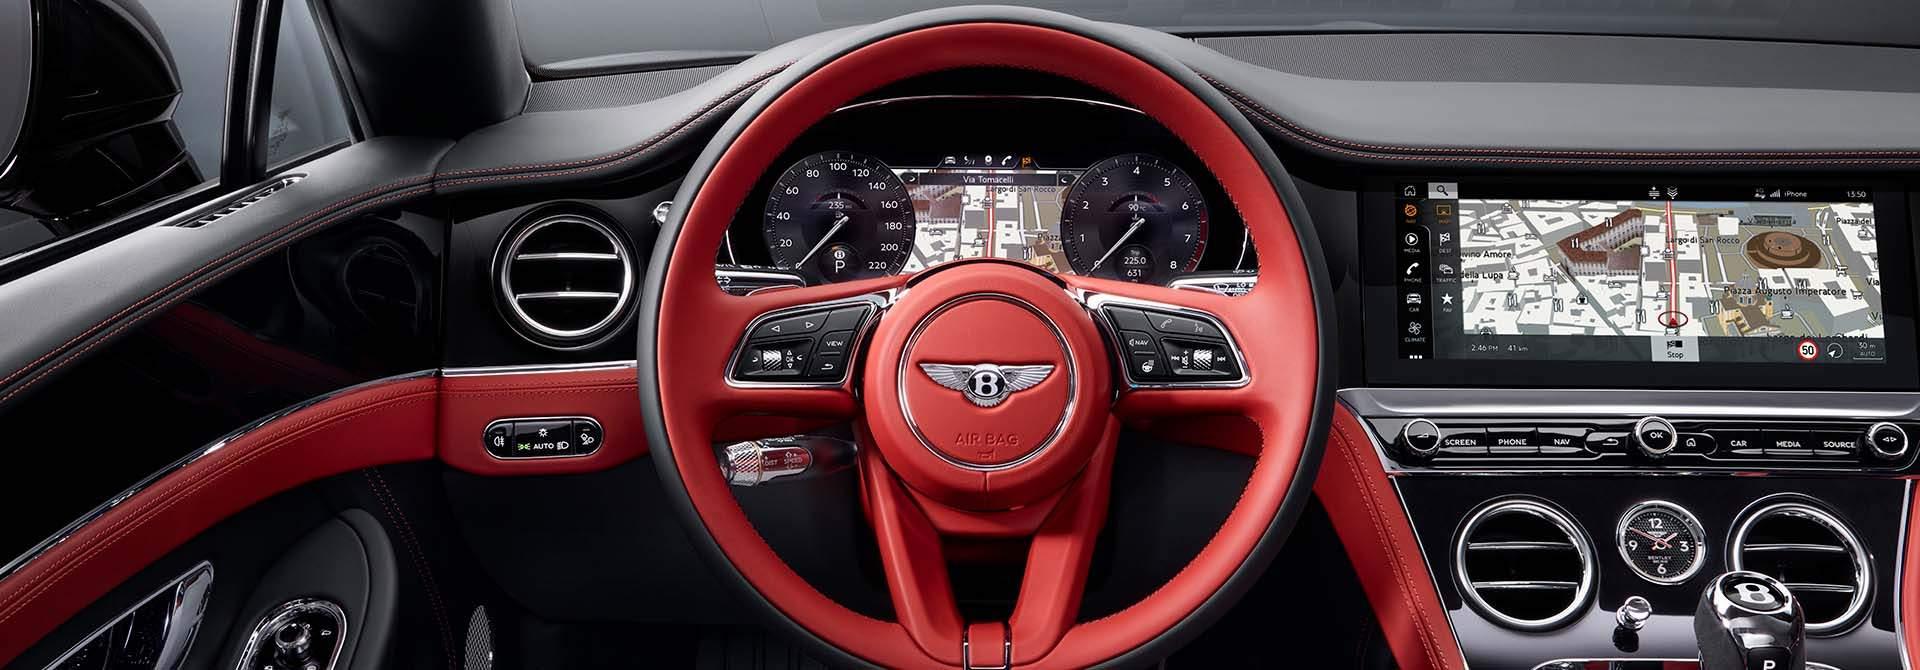 Wellness on wheels: The all-new Bentley Continental GT S